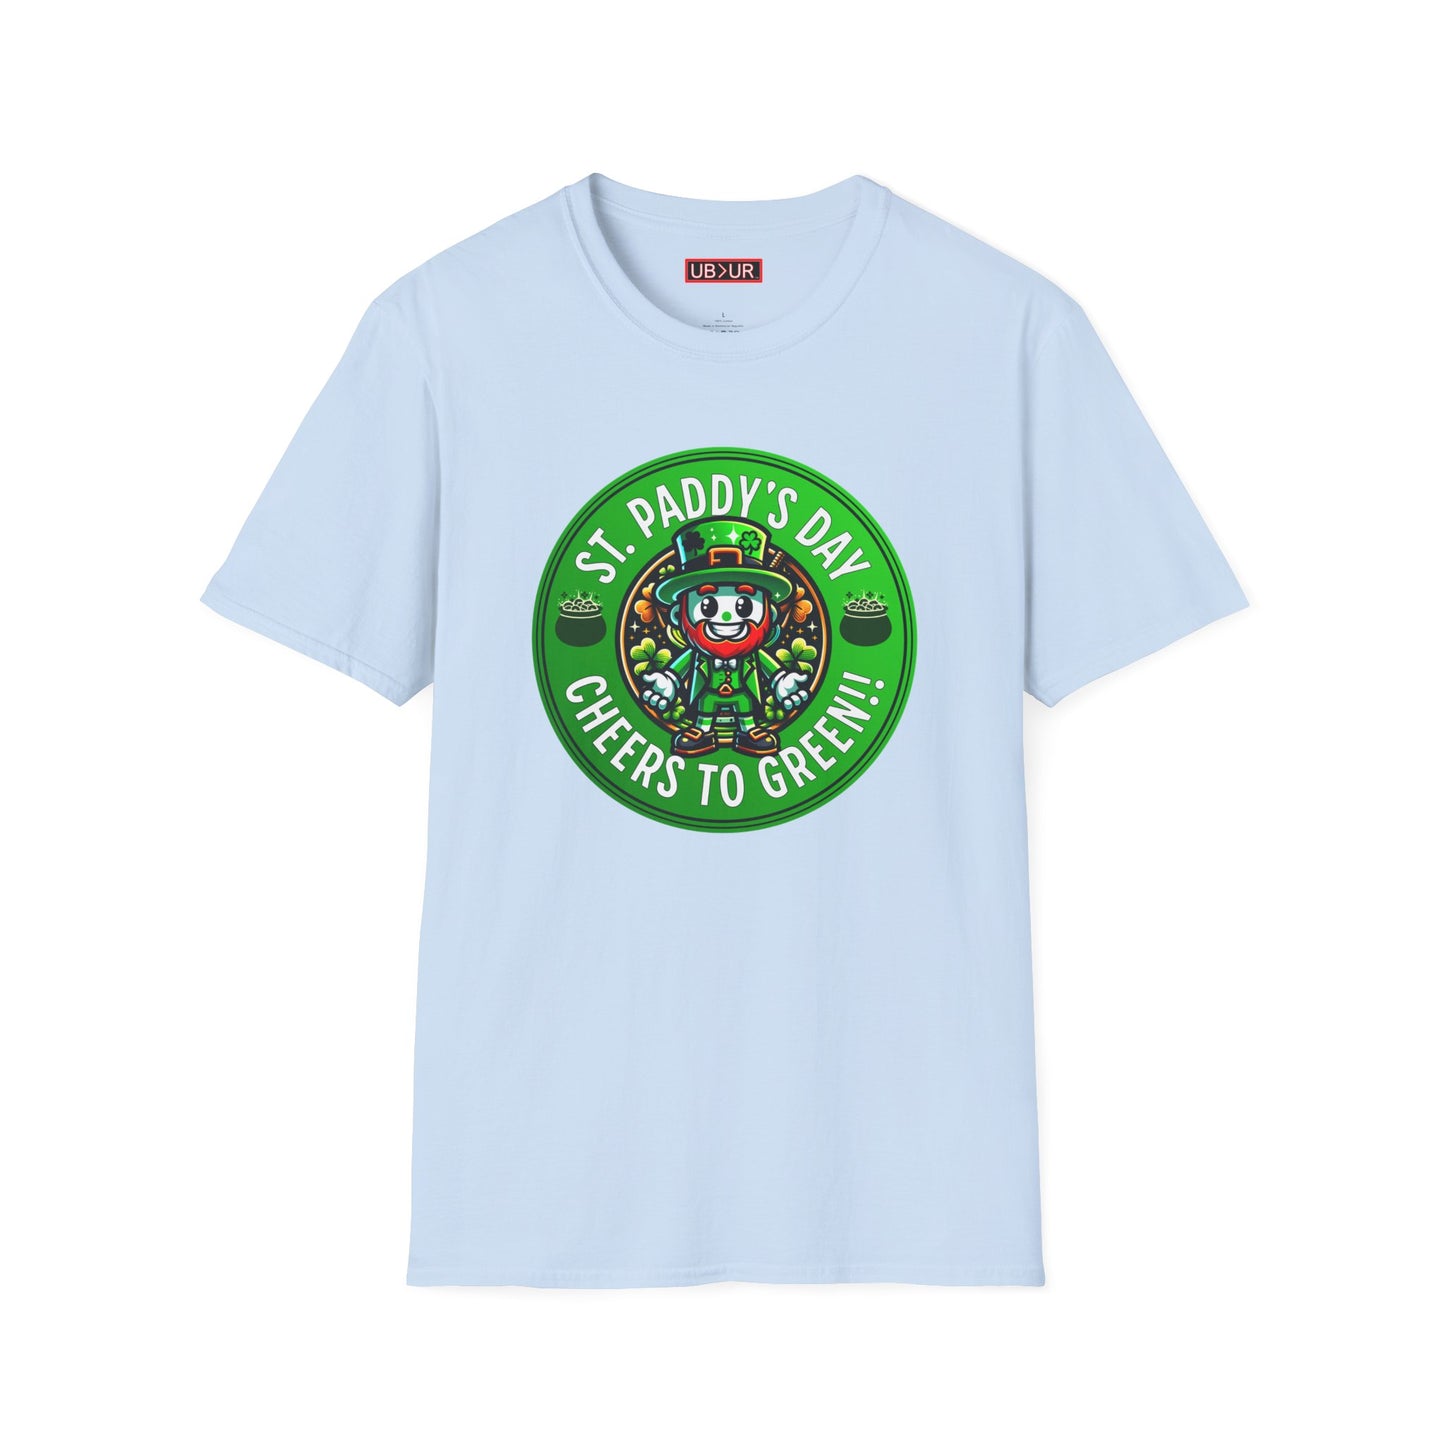 CHEERS TO GREEN-Unisex Softstyle T-Shirt